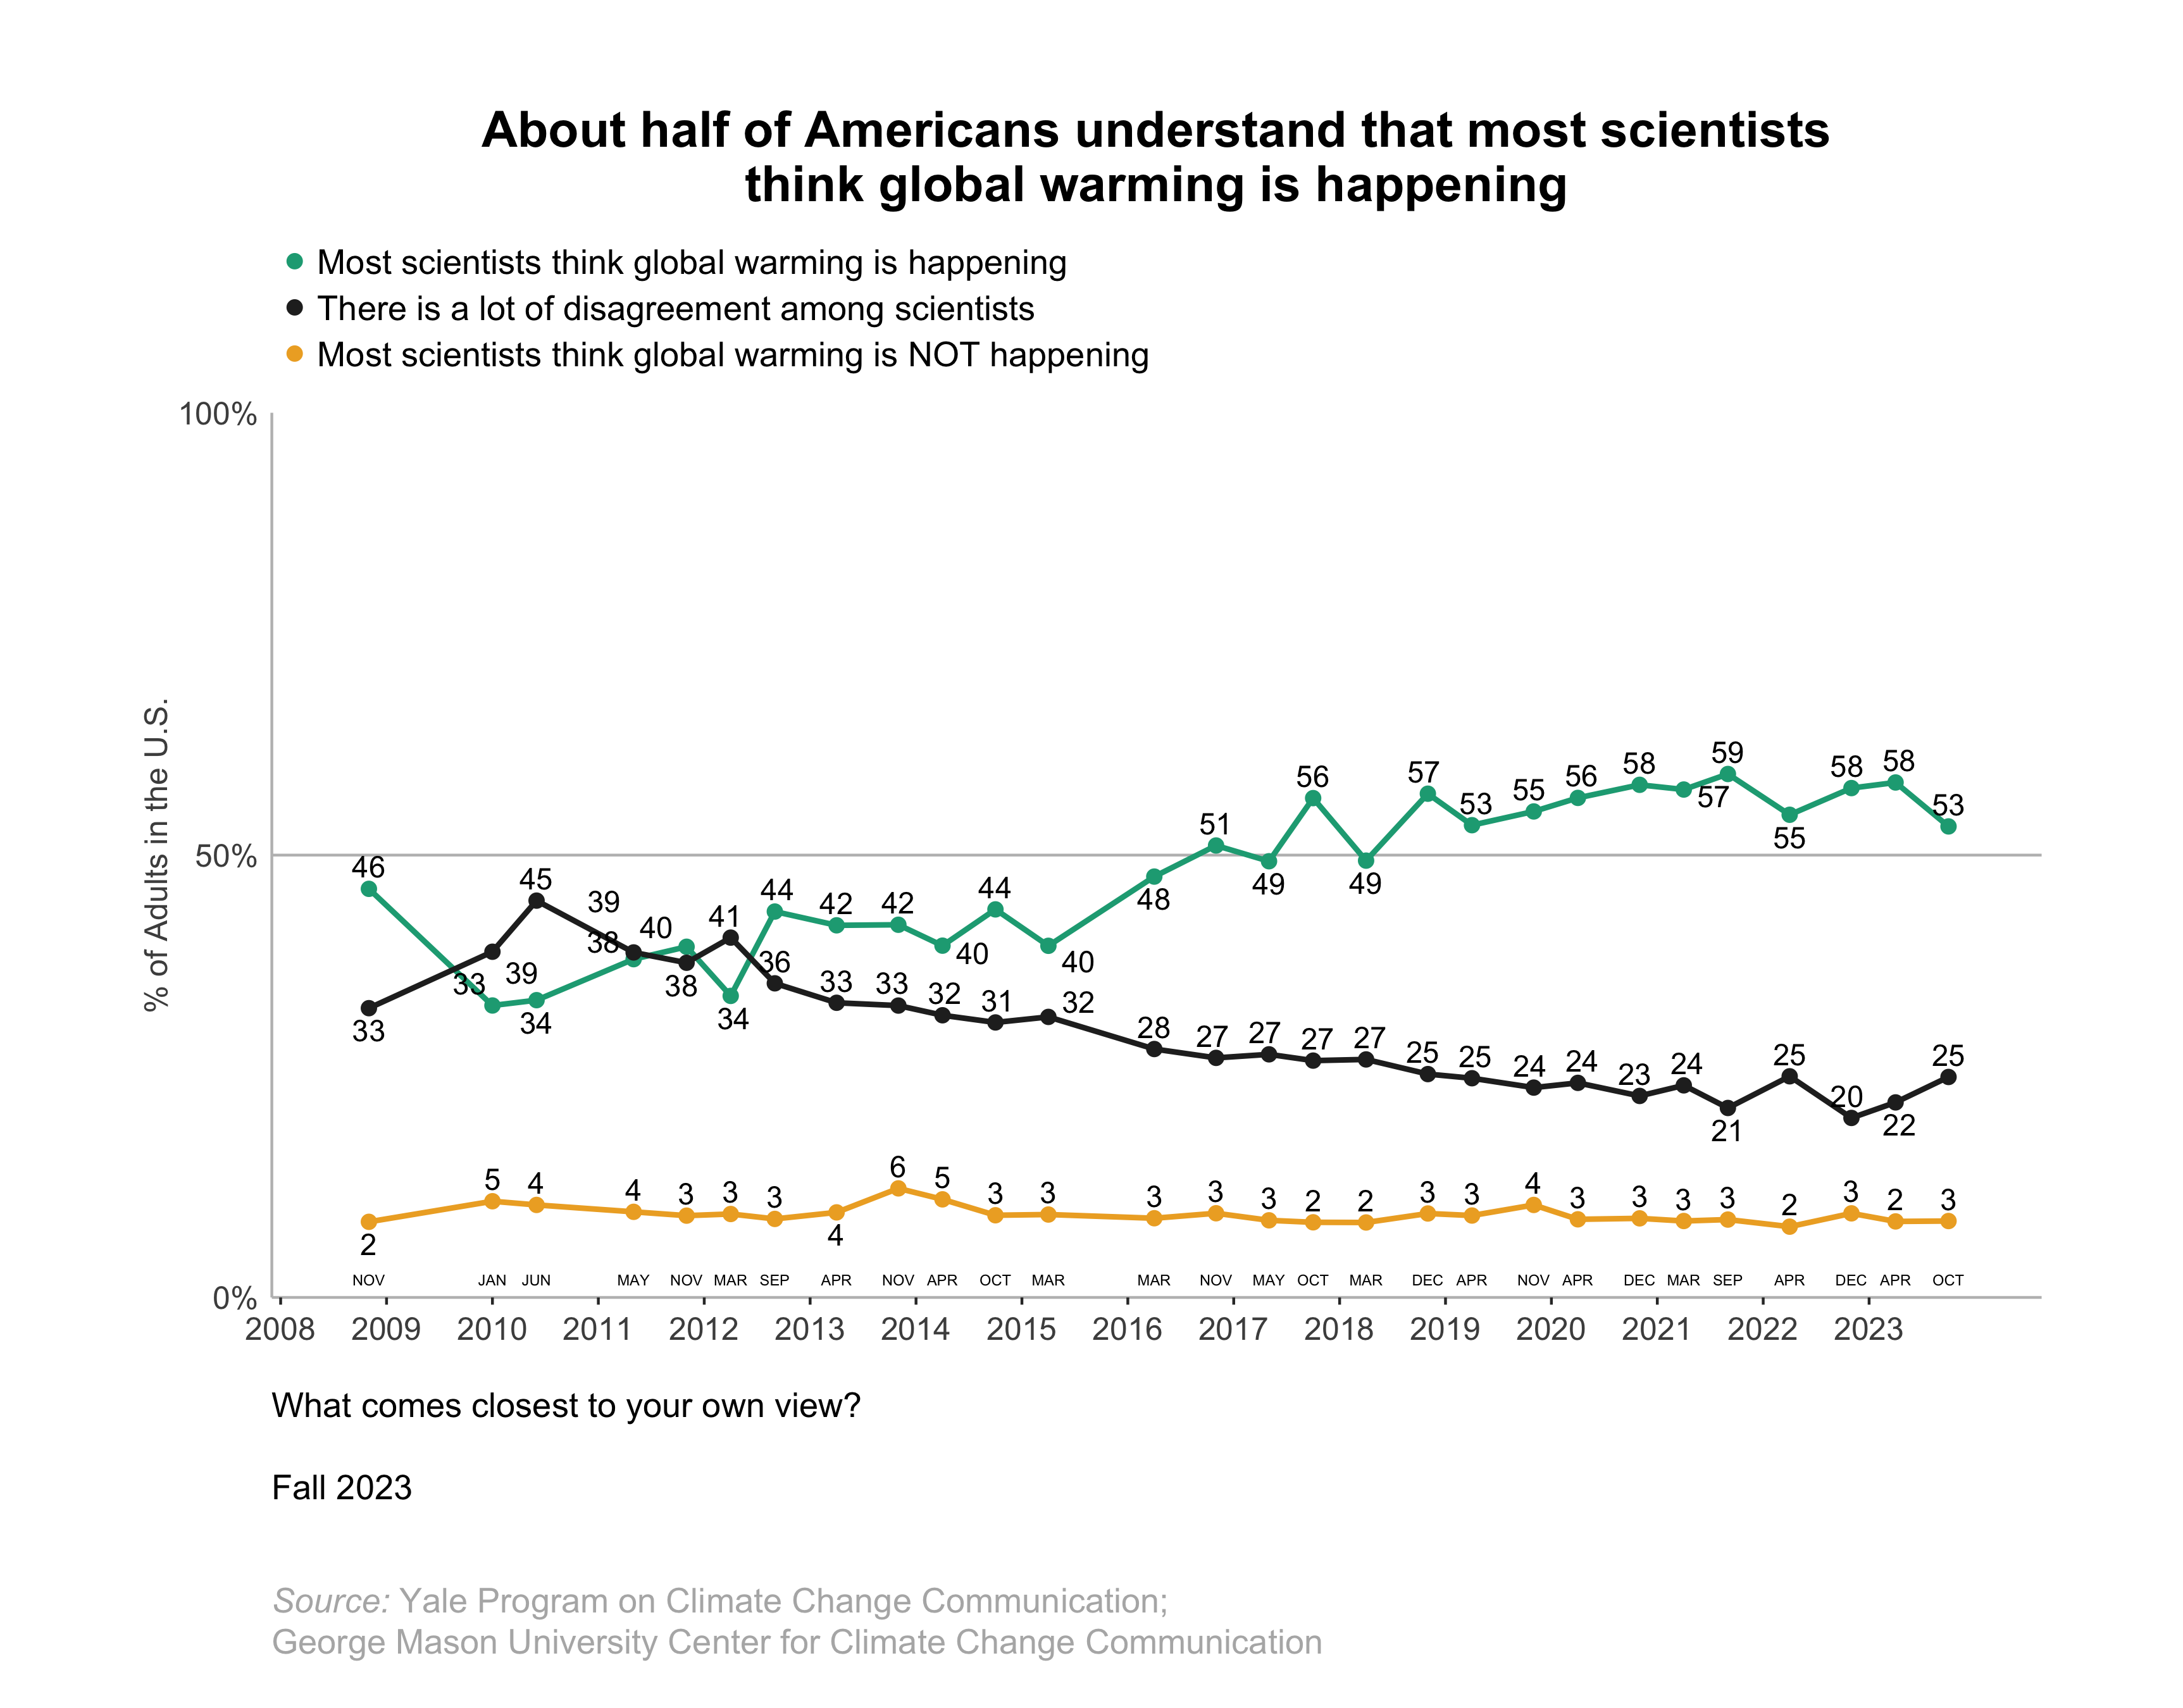 This line graph shows the percentage of Americans over time since 2008 who understand that most scientists think global warming is happening. About half of Americans understand that most scientists think global warming is happening. Data: Climate Change in the American Mind, Fall 2023. Refer to the data tables in Appendix 1 of the report for all percentages.